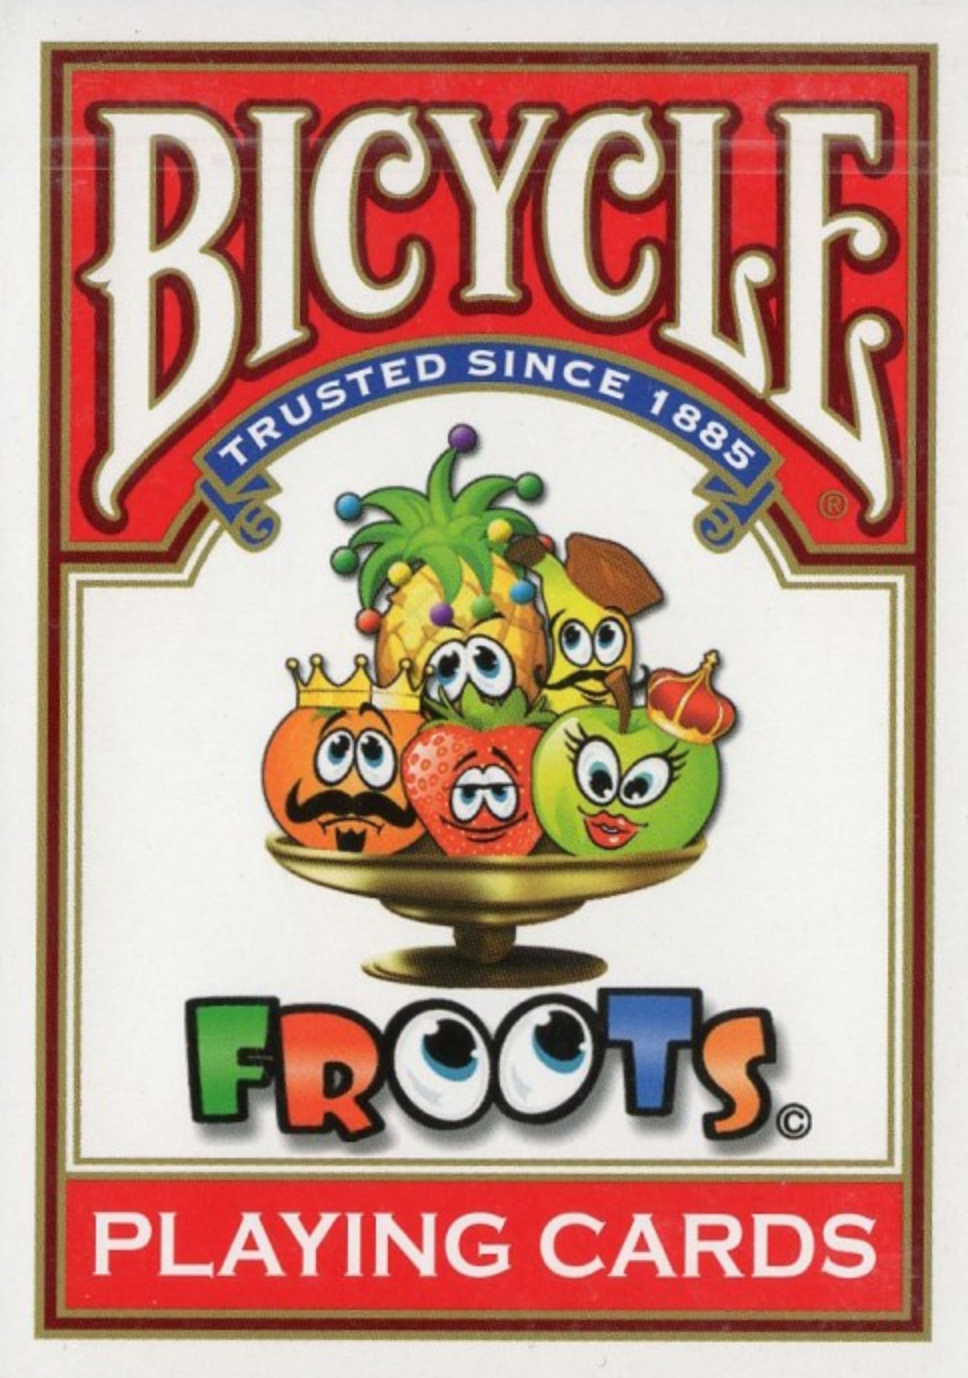 Bicycle FROOTS Playing Cards Deck